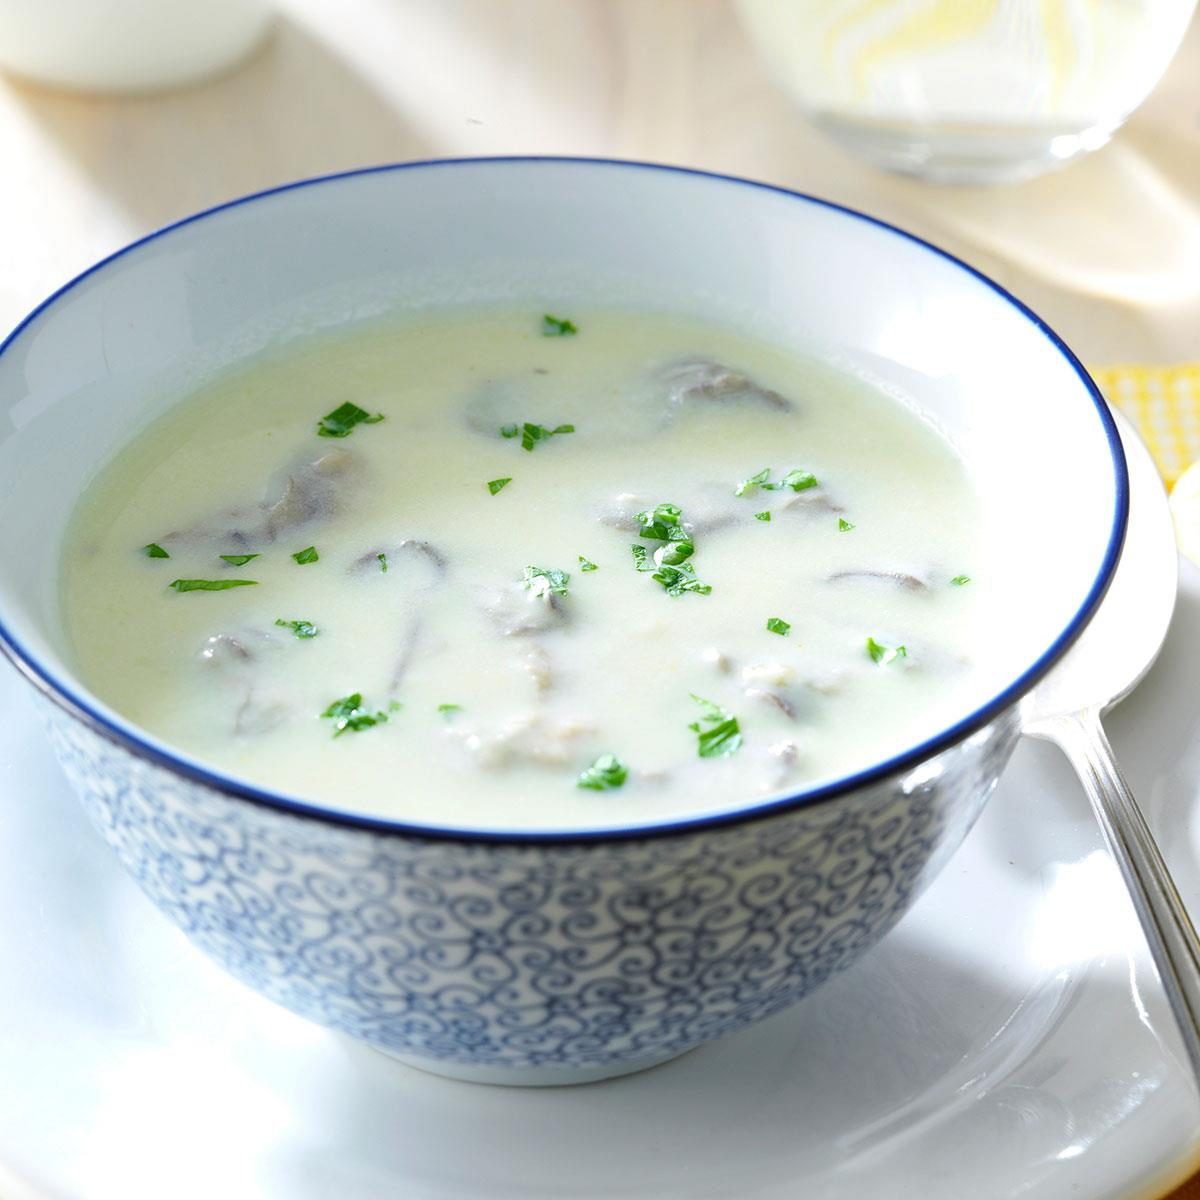 https://www.tasteofhome.com/wp-content/uploads/2018/01/New-Year-s-Oyster-Stew_exps3235_SF143315D11__05_3bC_RMS-1.jpg